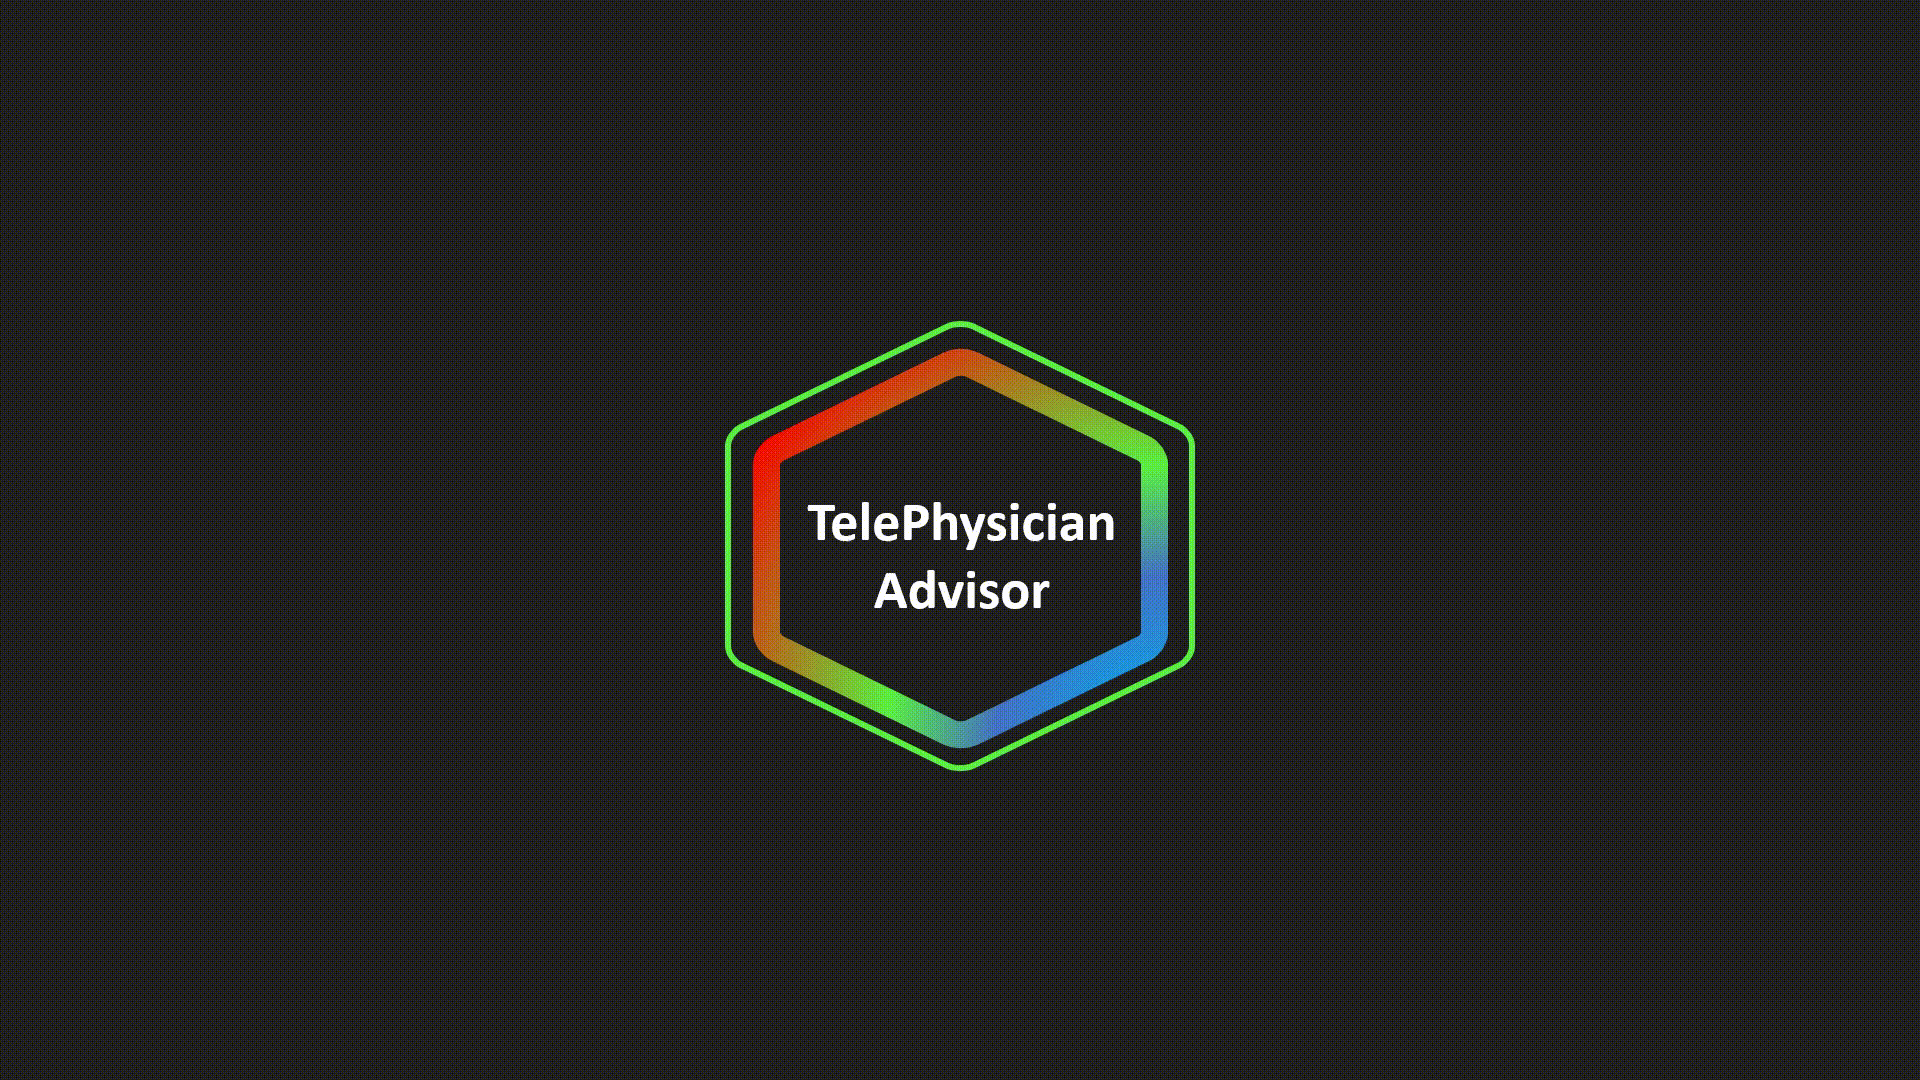 Tele-Physician Advisor Service Video Infographic for improved telemedicine hospital readmissions and higher physician satisfaction and hospital revenues by virtual hospitalist at vhospitalist